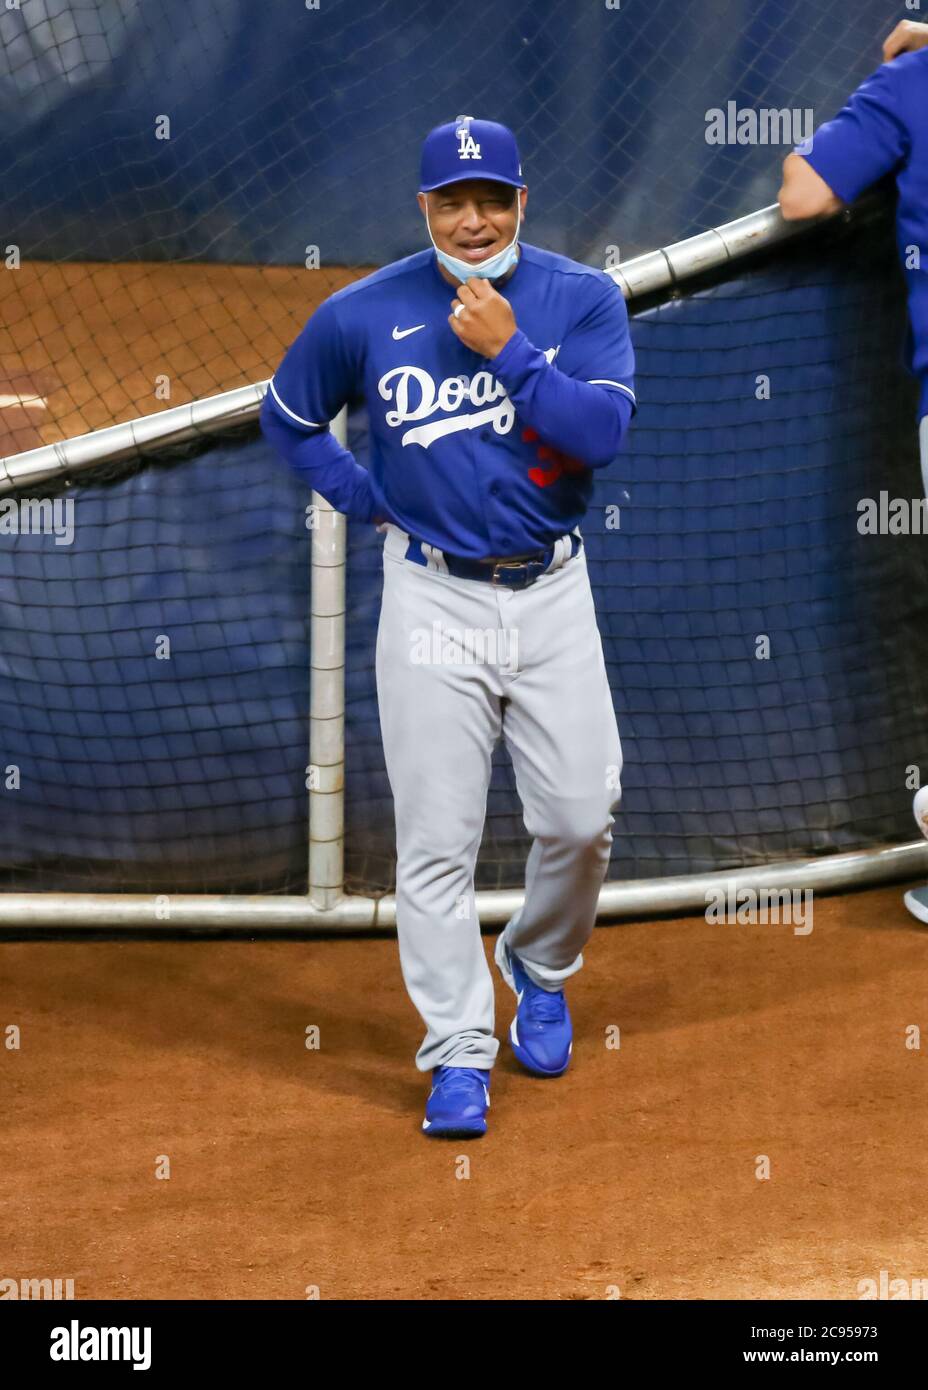 Houston, Texas, USA. 28th July, 2020. Los Angeles Dodgers manager